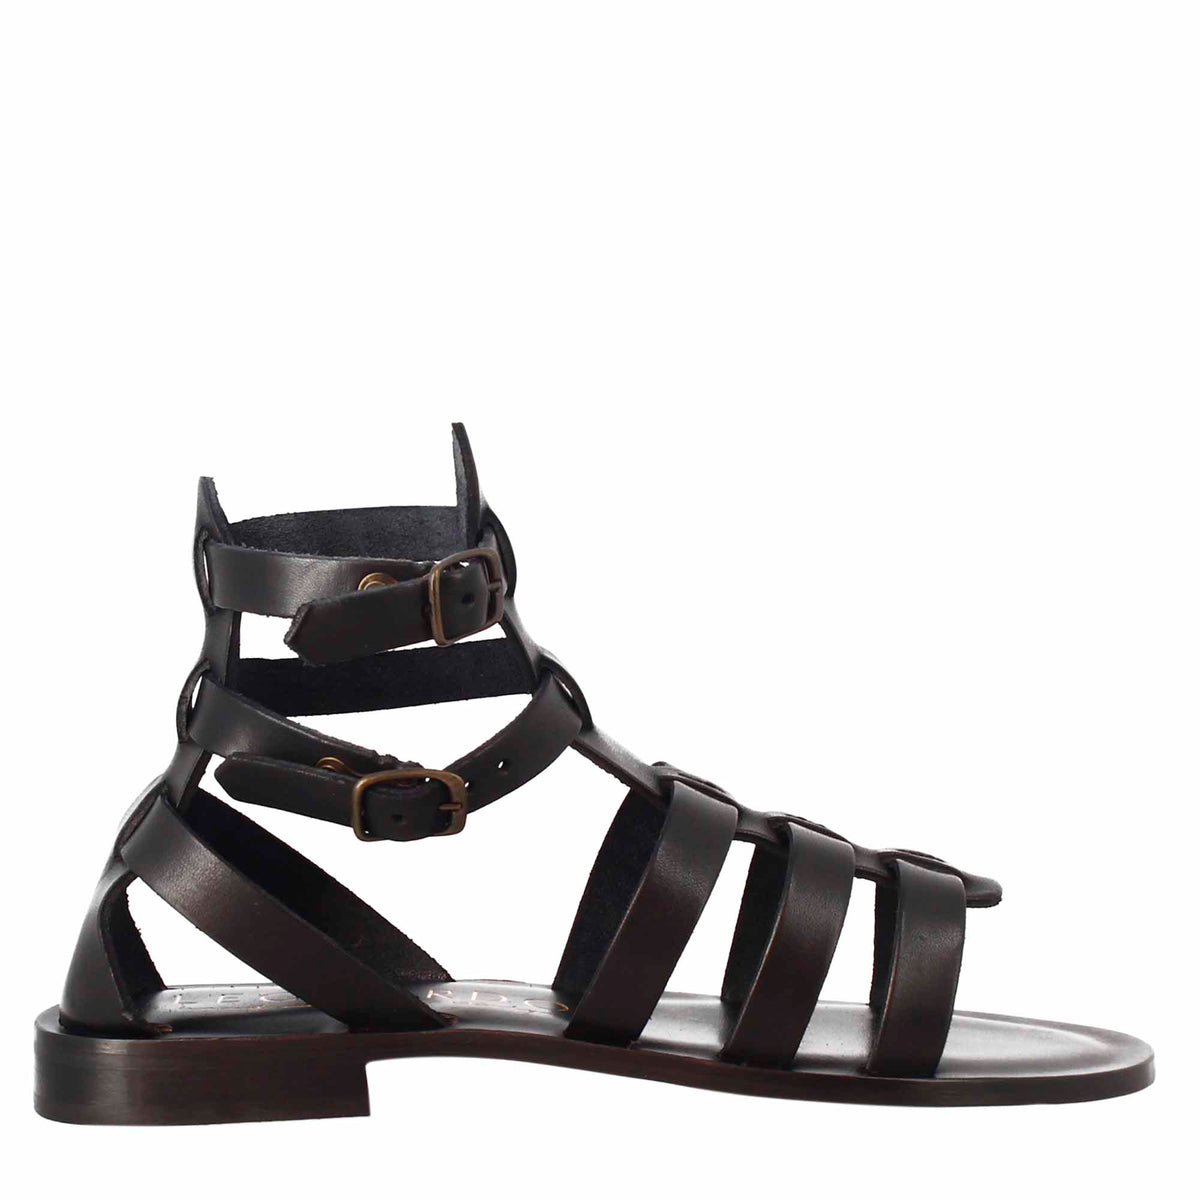 Women's Roman style ankle sandals in black leather